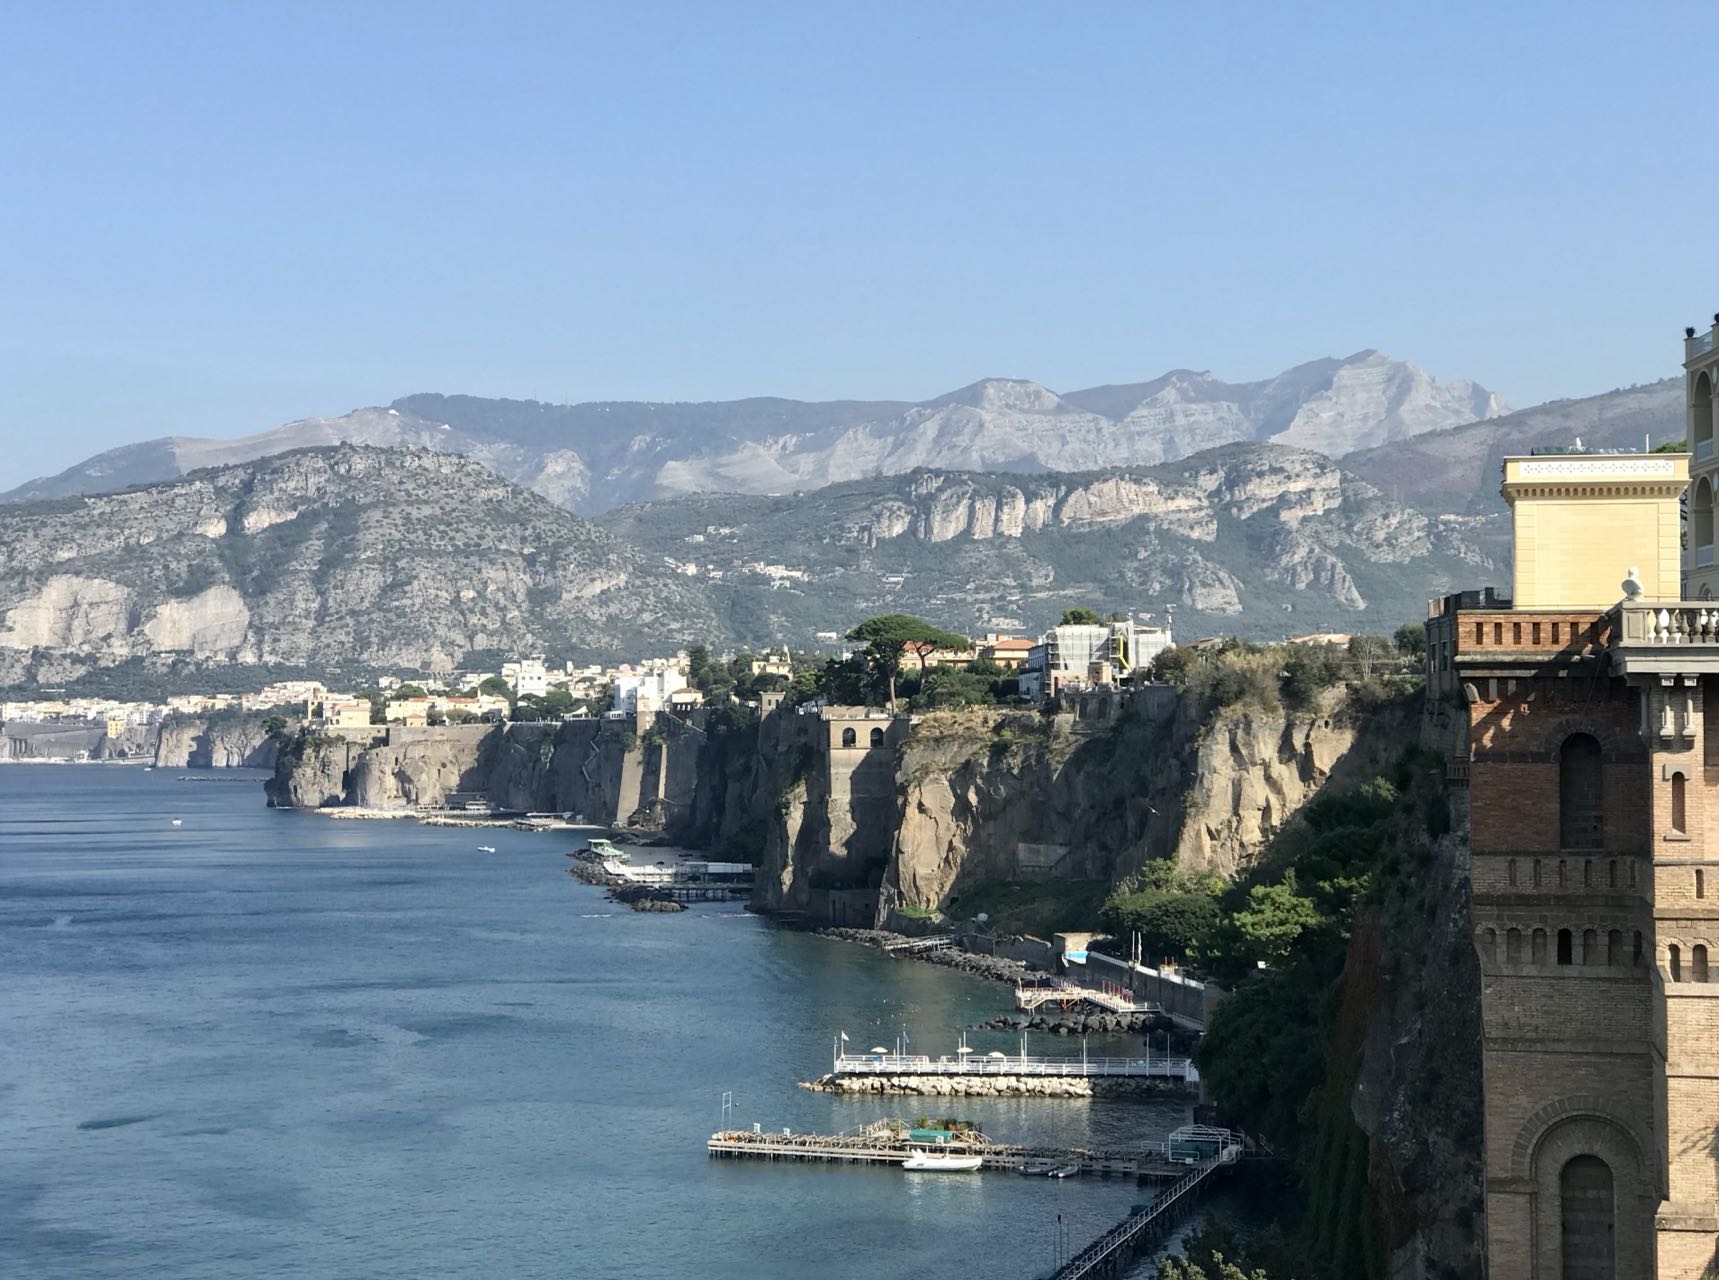 Guangneng's Italy, Sorrento